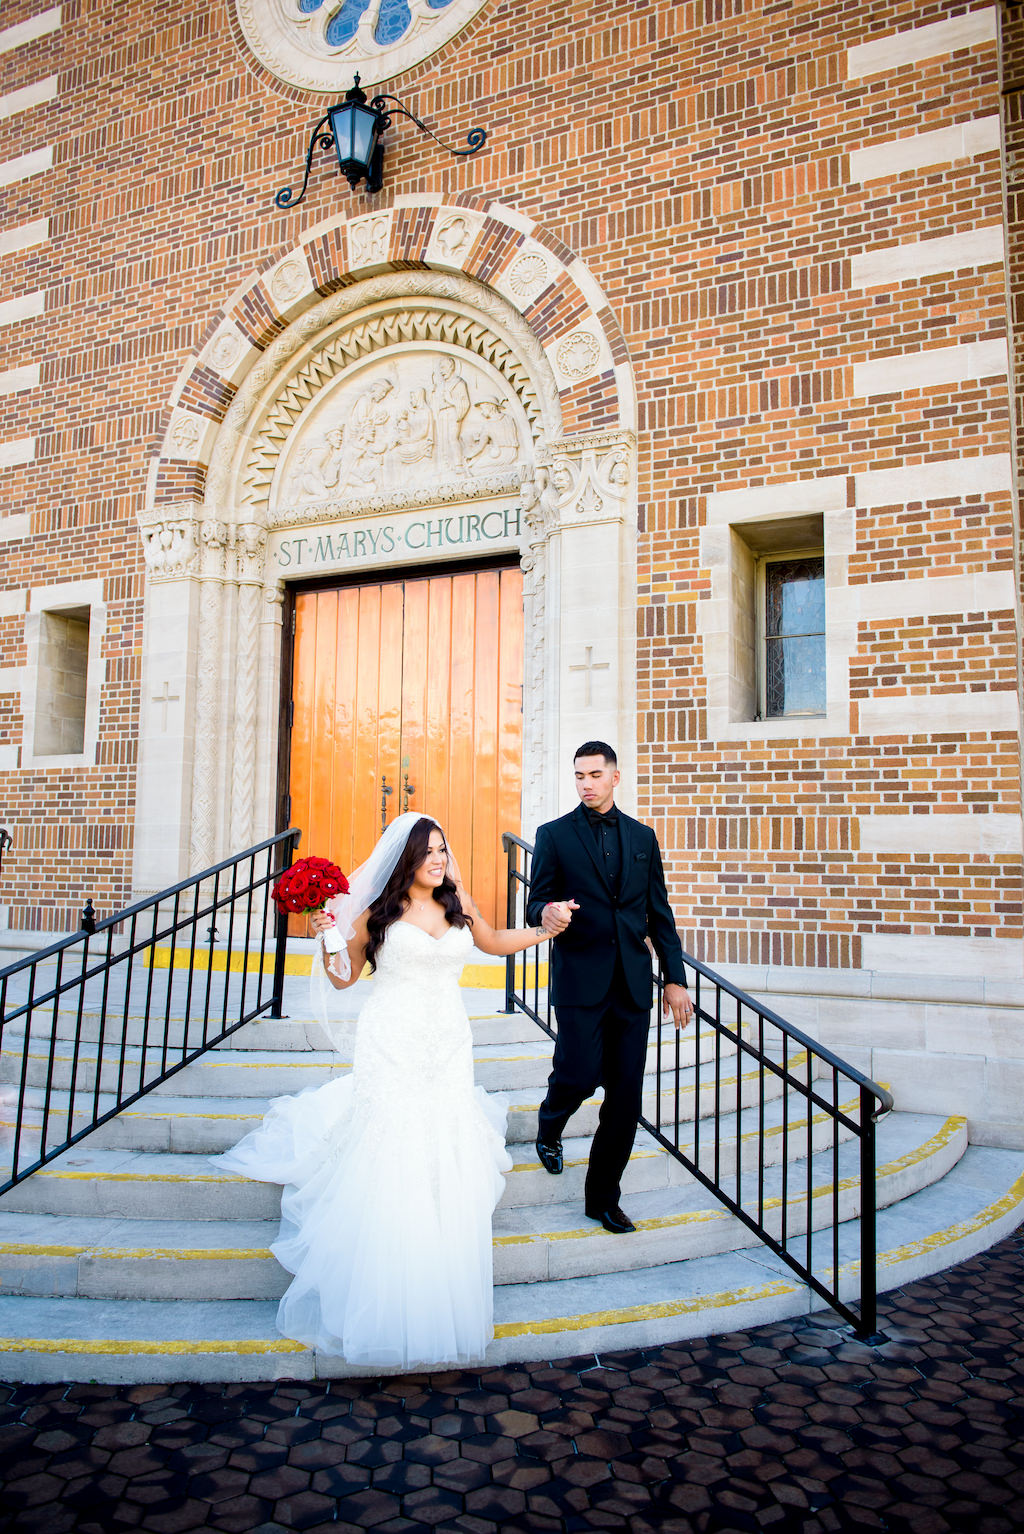 St. Petersburg Wedding Ceremony Venue St Mary Our Lady of Grace Catholic Church, Bride Wearing Sweetheart White and Tulle Wedding Dress with Tulle Veil Holding Red Rose Bouquet, Groom Wearing Black on Black Suit